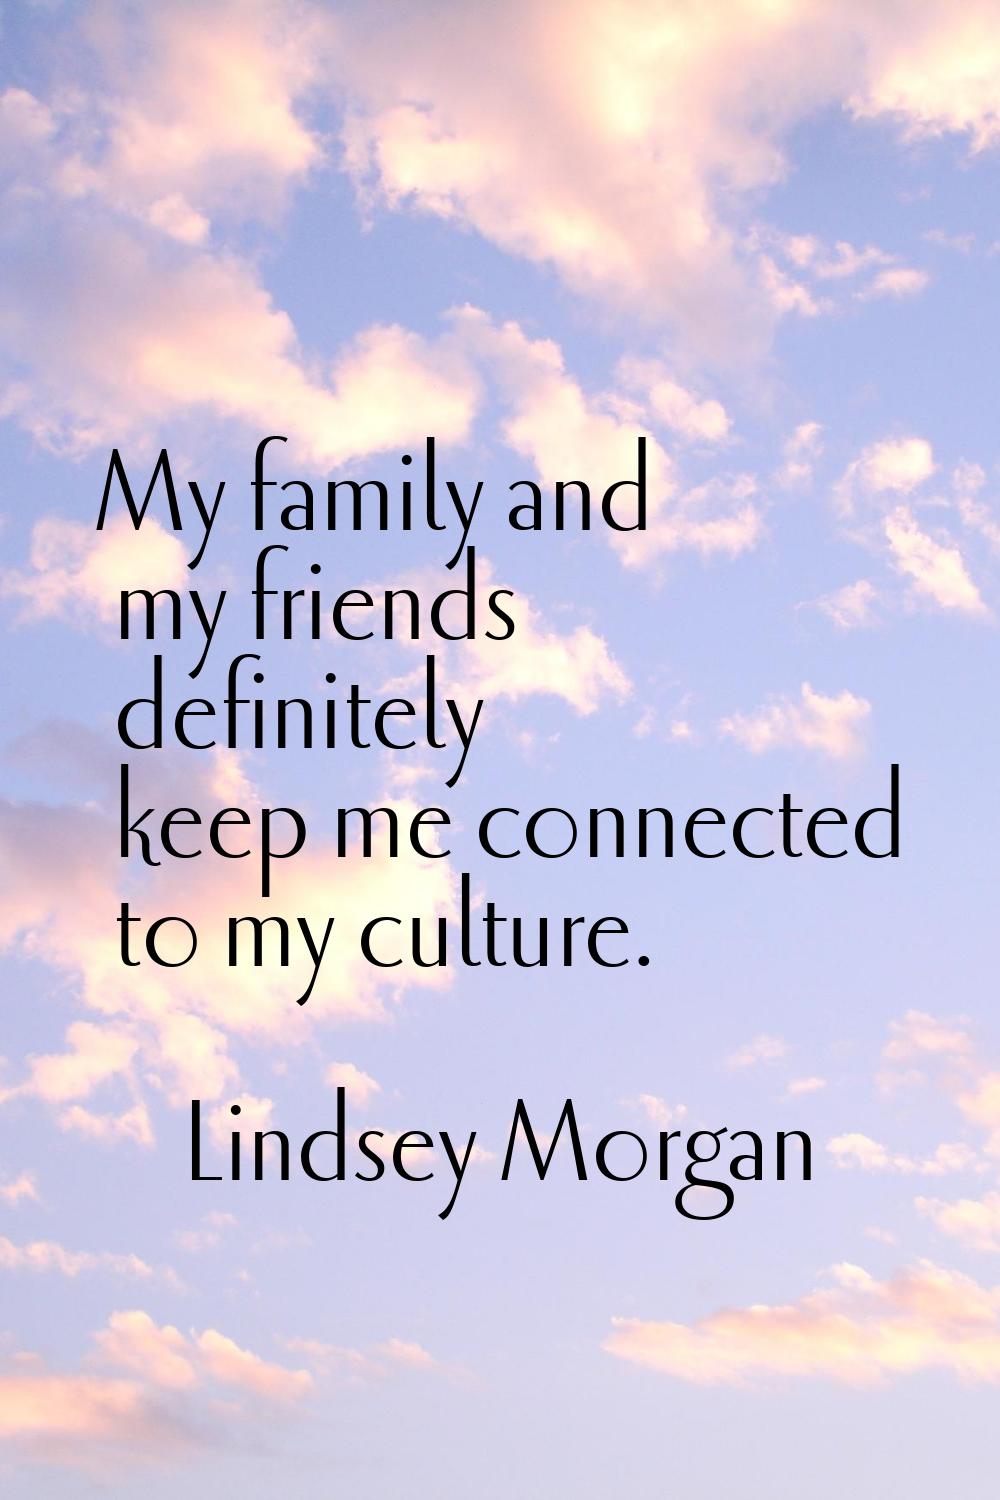 My family and my friends definitely keep me connected to my culture.